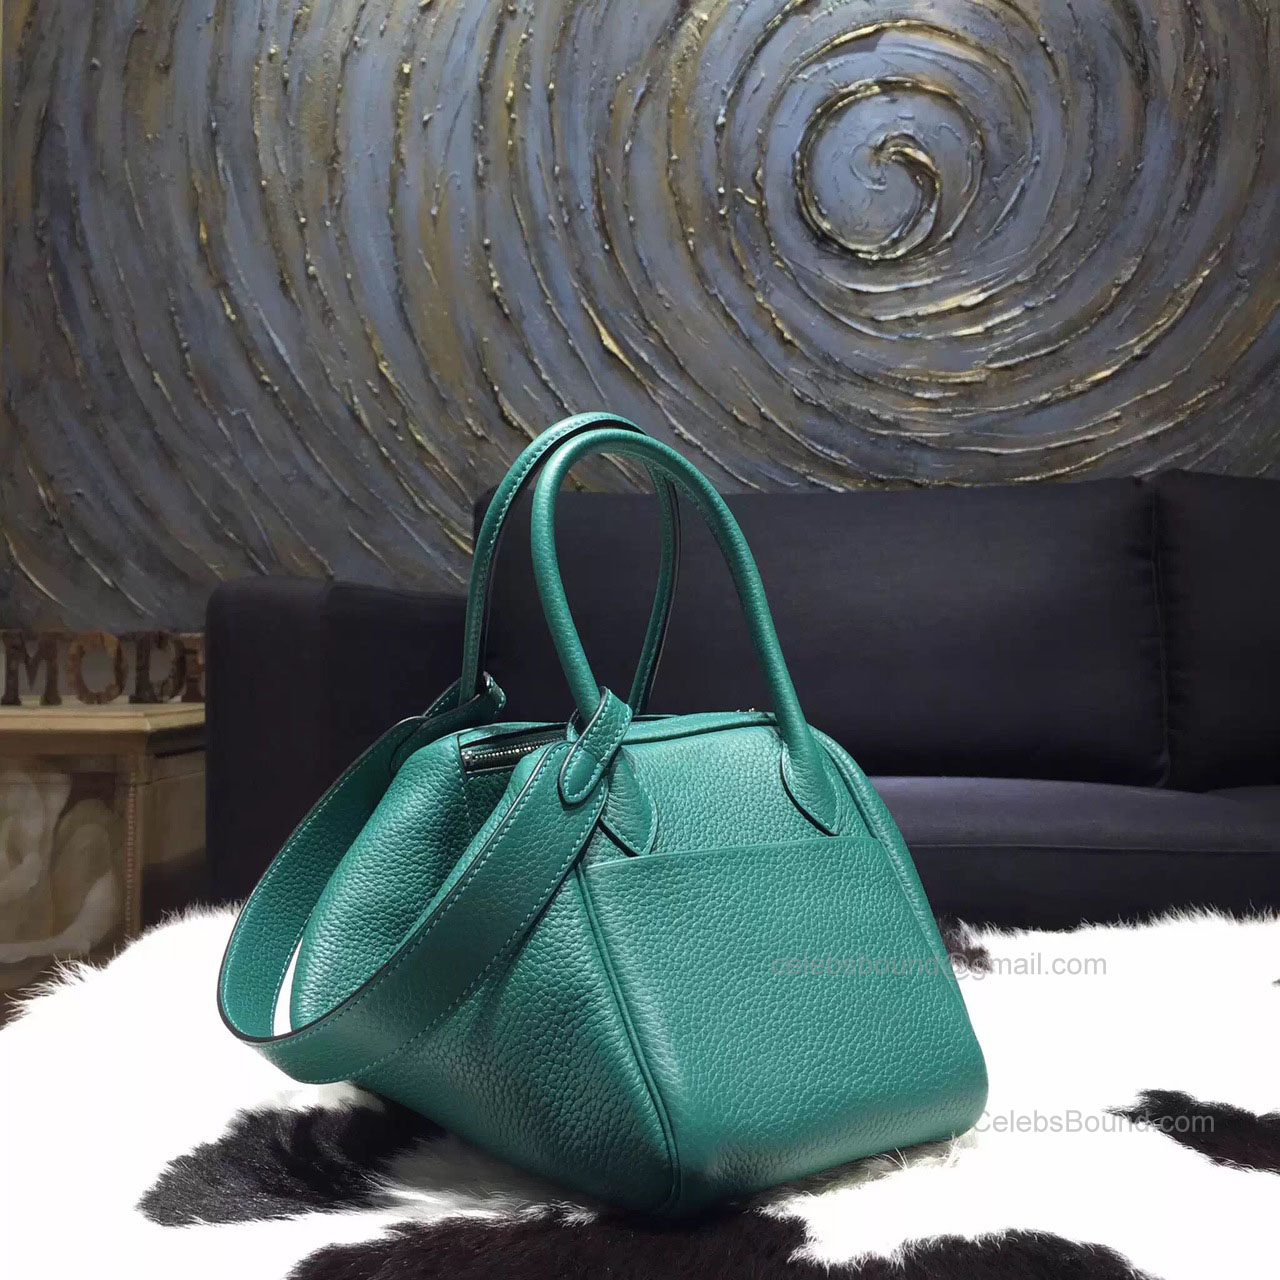 Hermes Lindy 30 Bag in Malachite Z6 Clemence Leather Handstitched